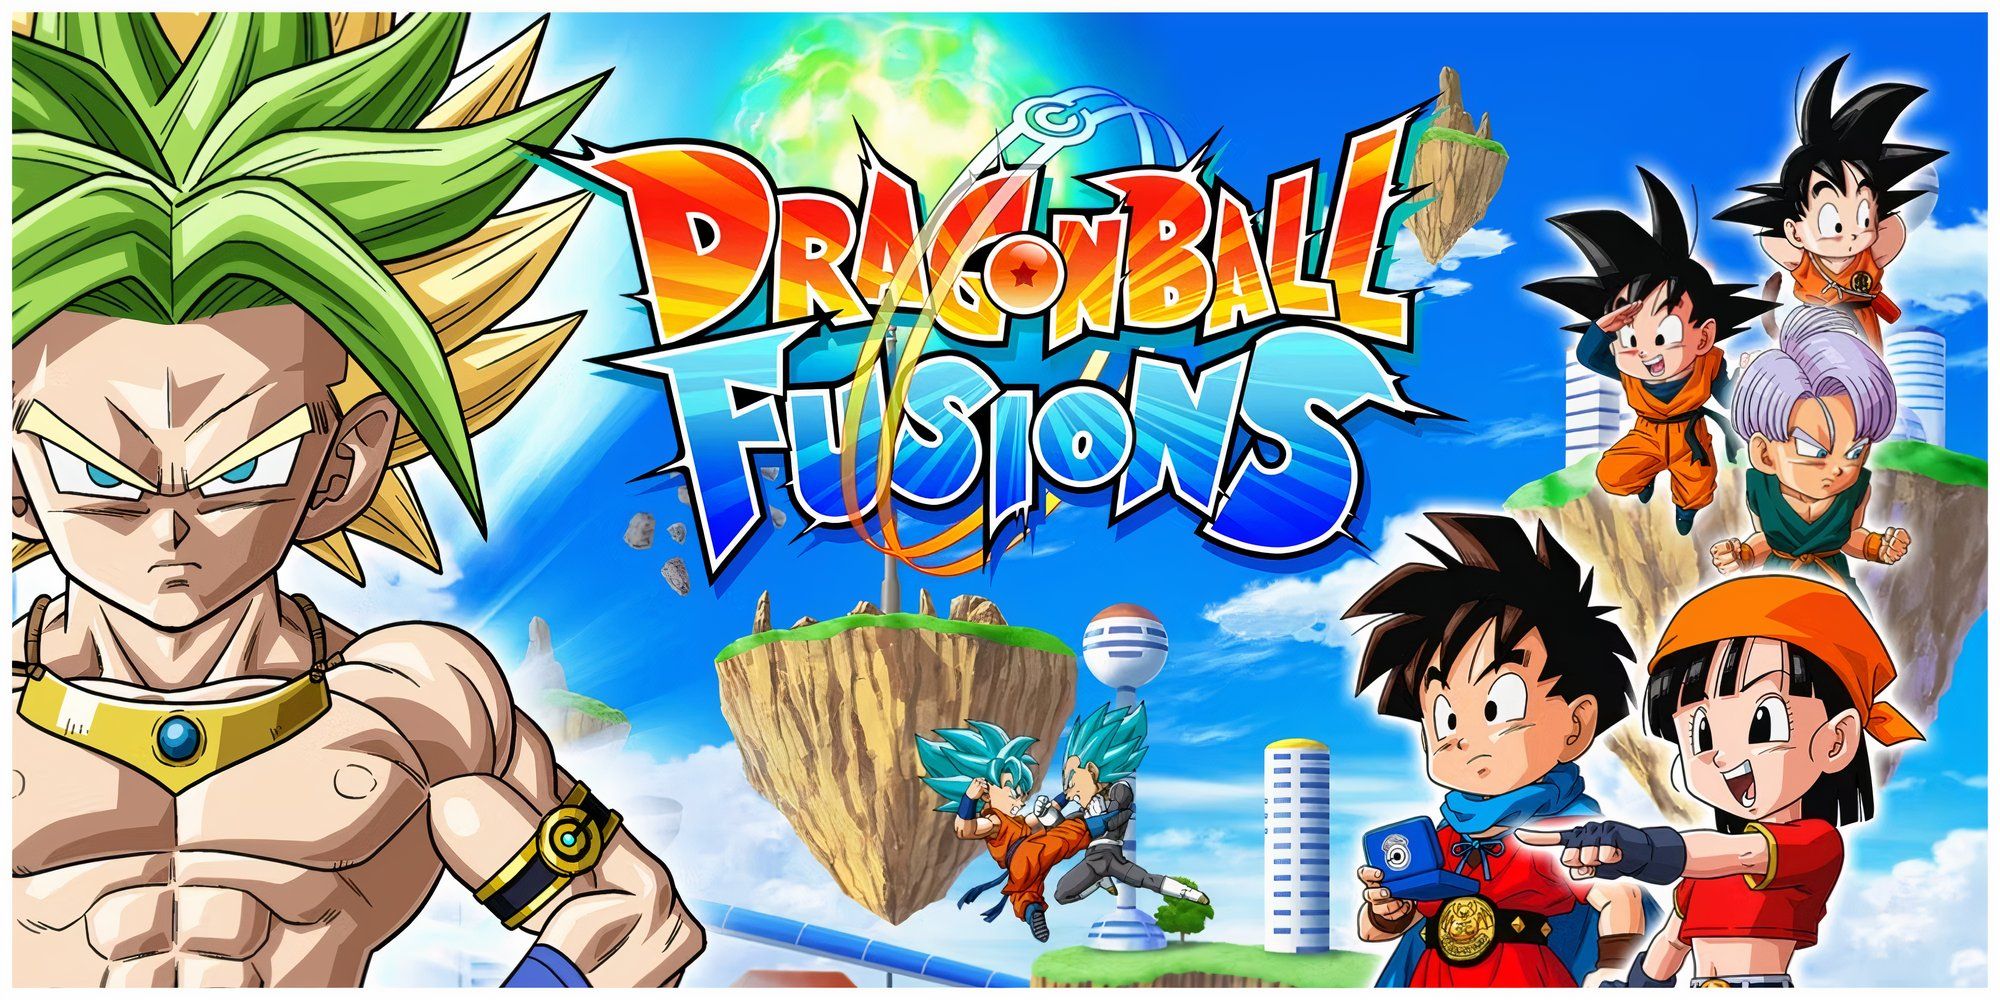 Artwork for Dragon Ball Fusions on the Nintendo DS